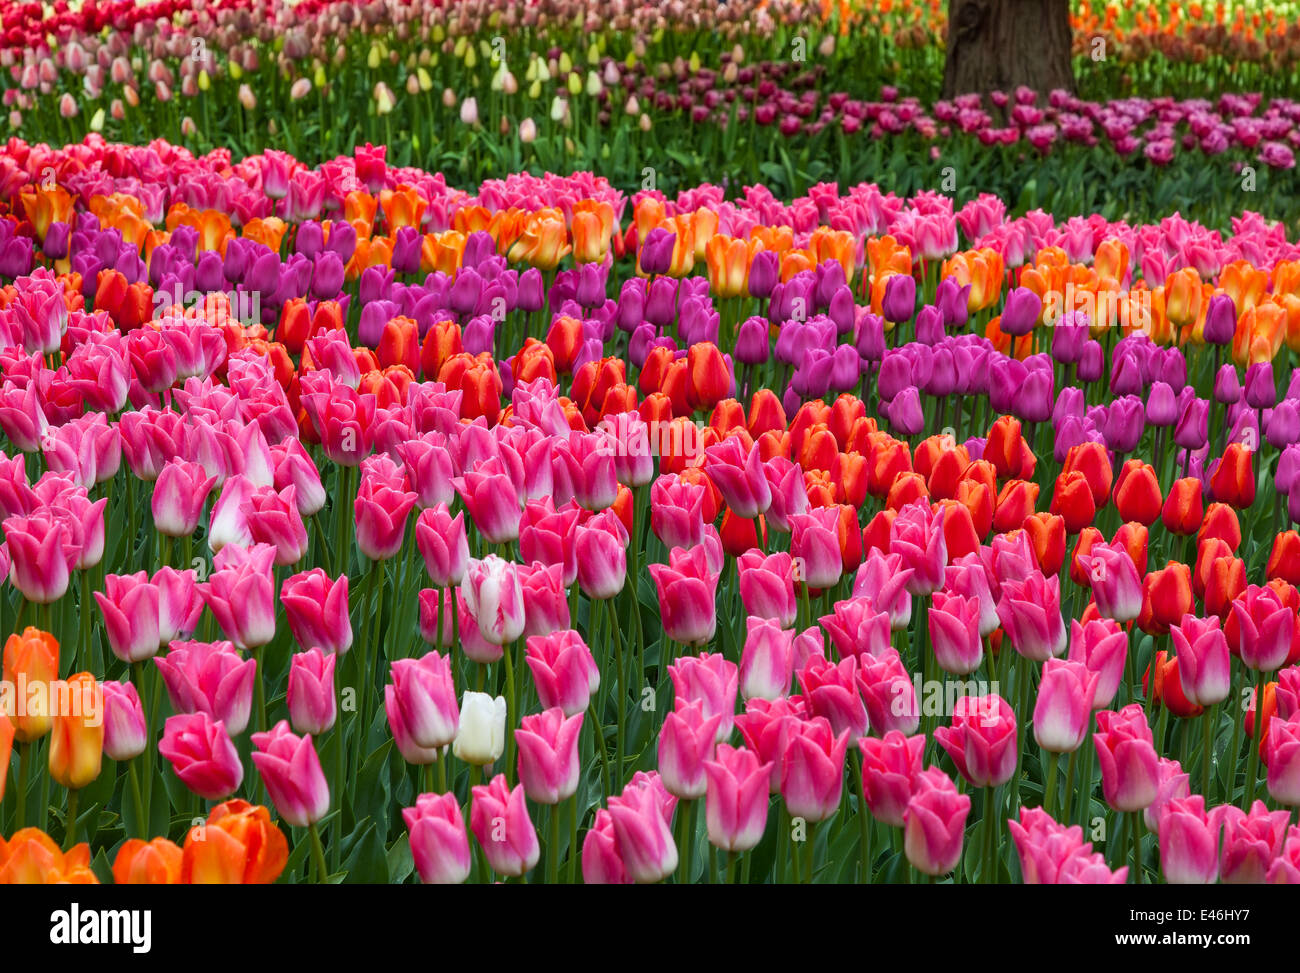 Skagit County, WA: Assorted varieties of flowering tulips form colorful patterns in the RoozenGaarde garden. Stock Photo